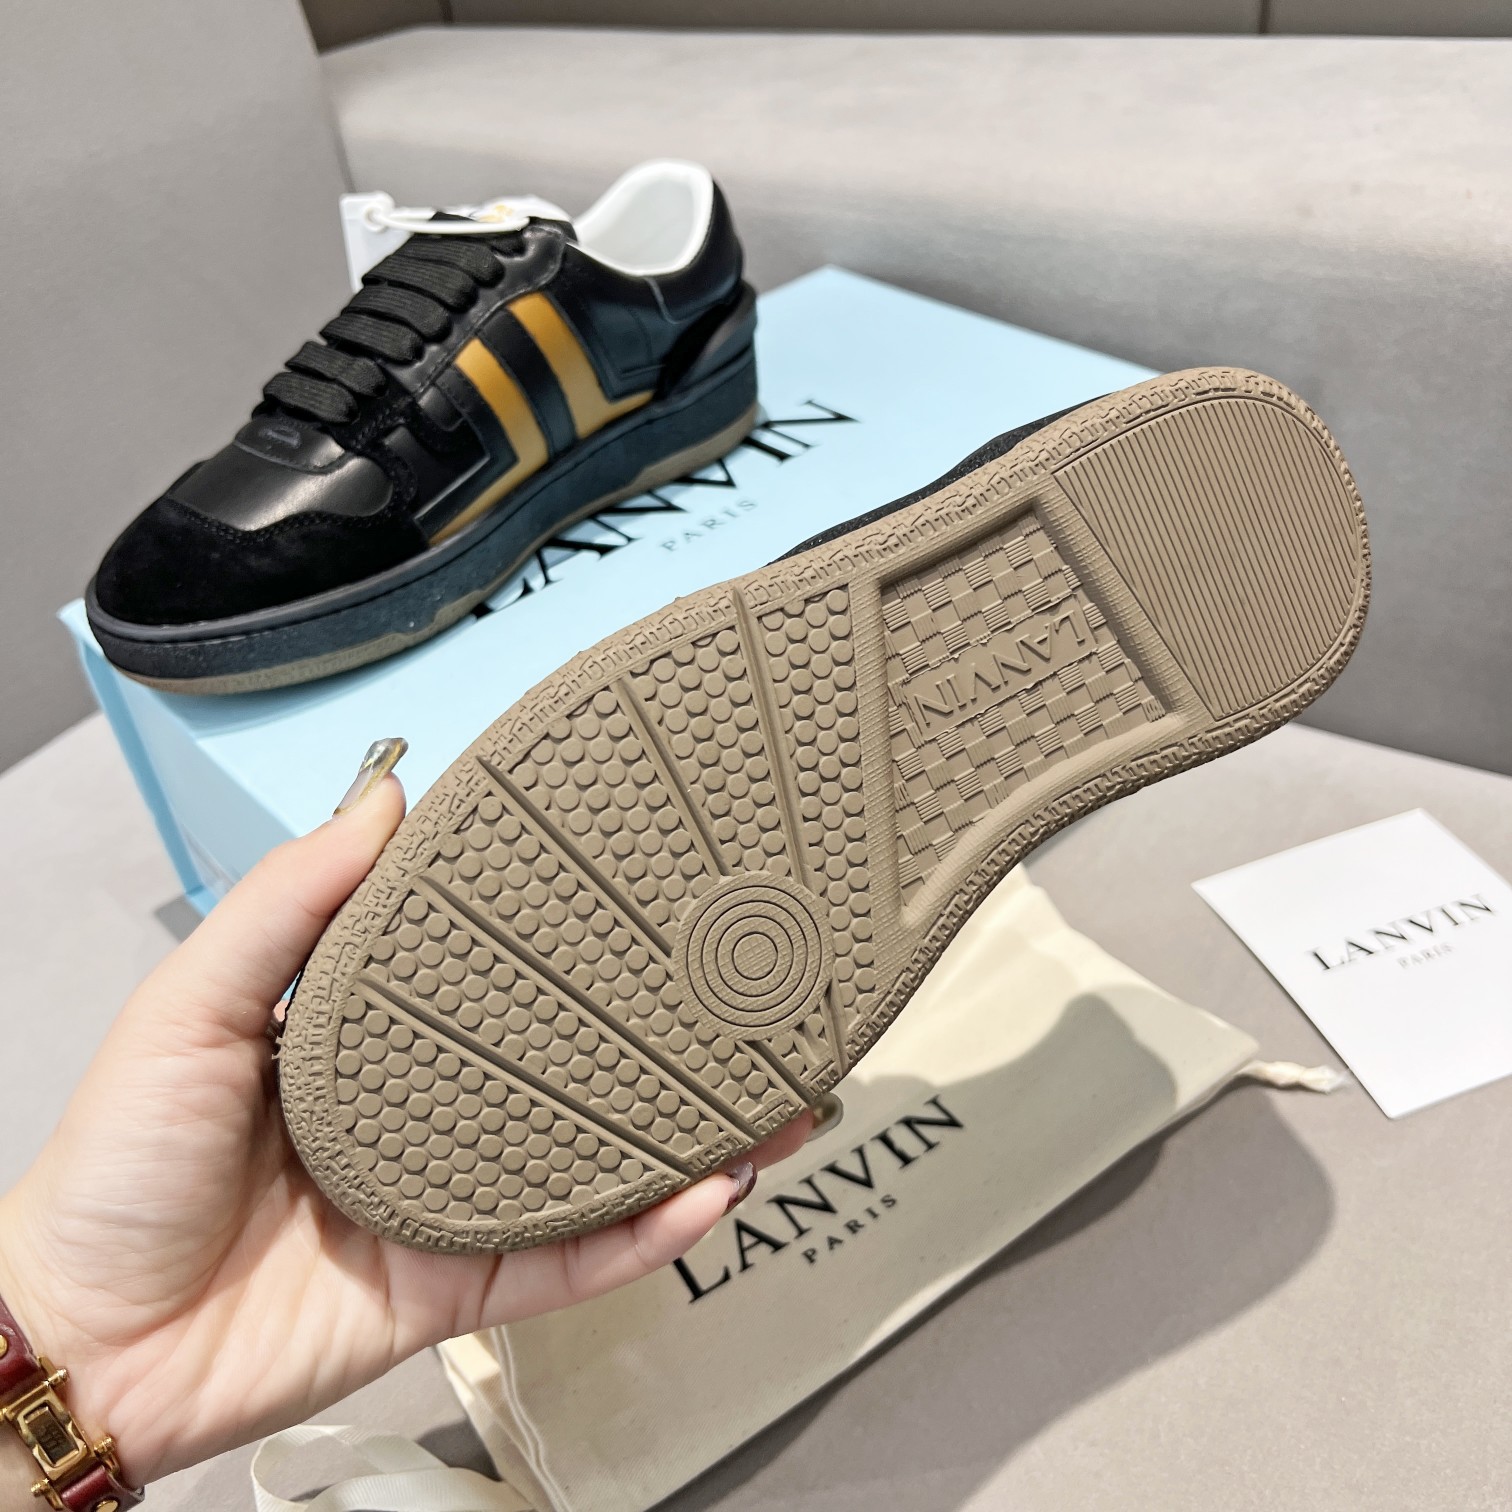 You Are Searching LANVIN Supplier On clothesyupoo.com | Yupoo